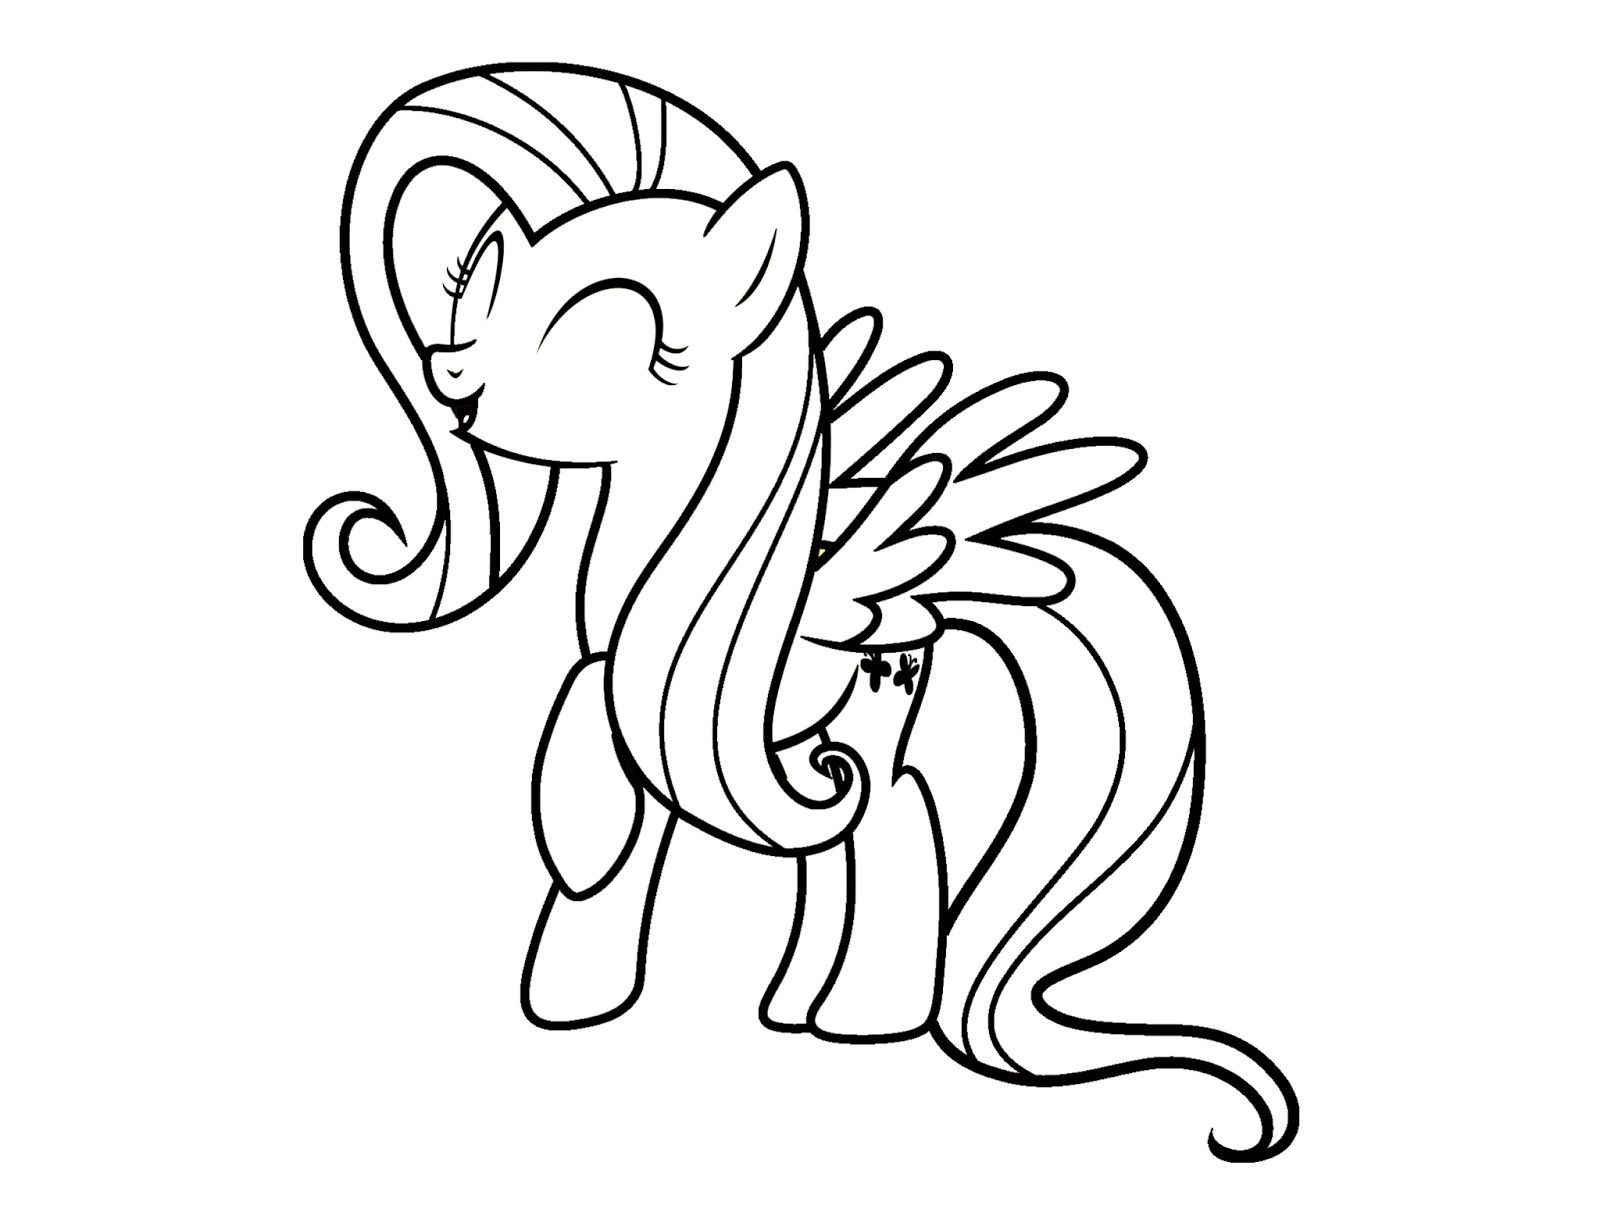 Free Coloring Sheets For Toddlers
 Free my little pony coloring pages Coloring pages for kids